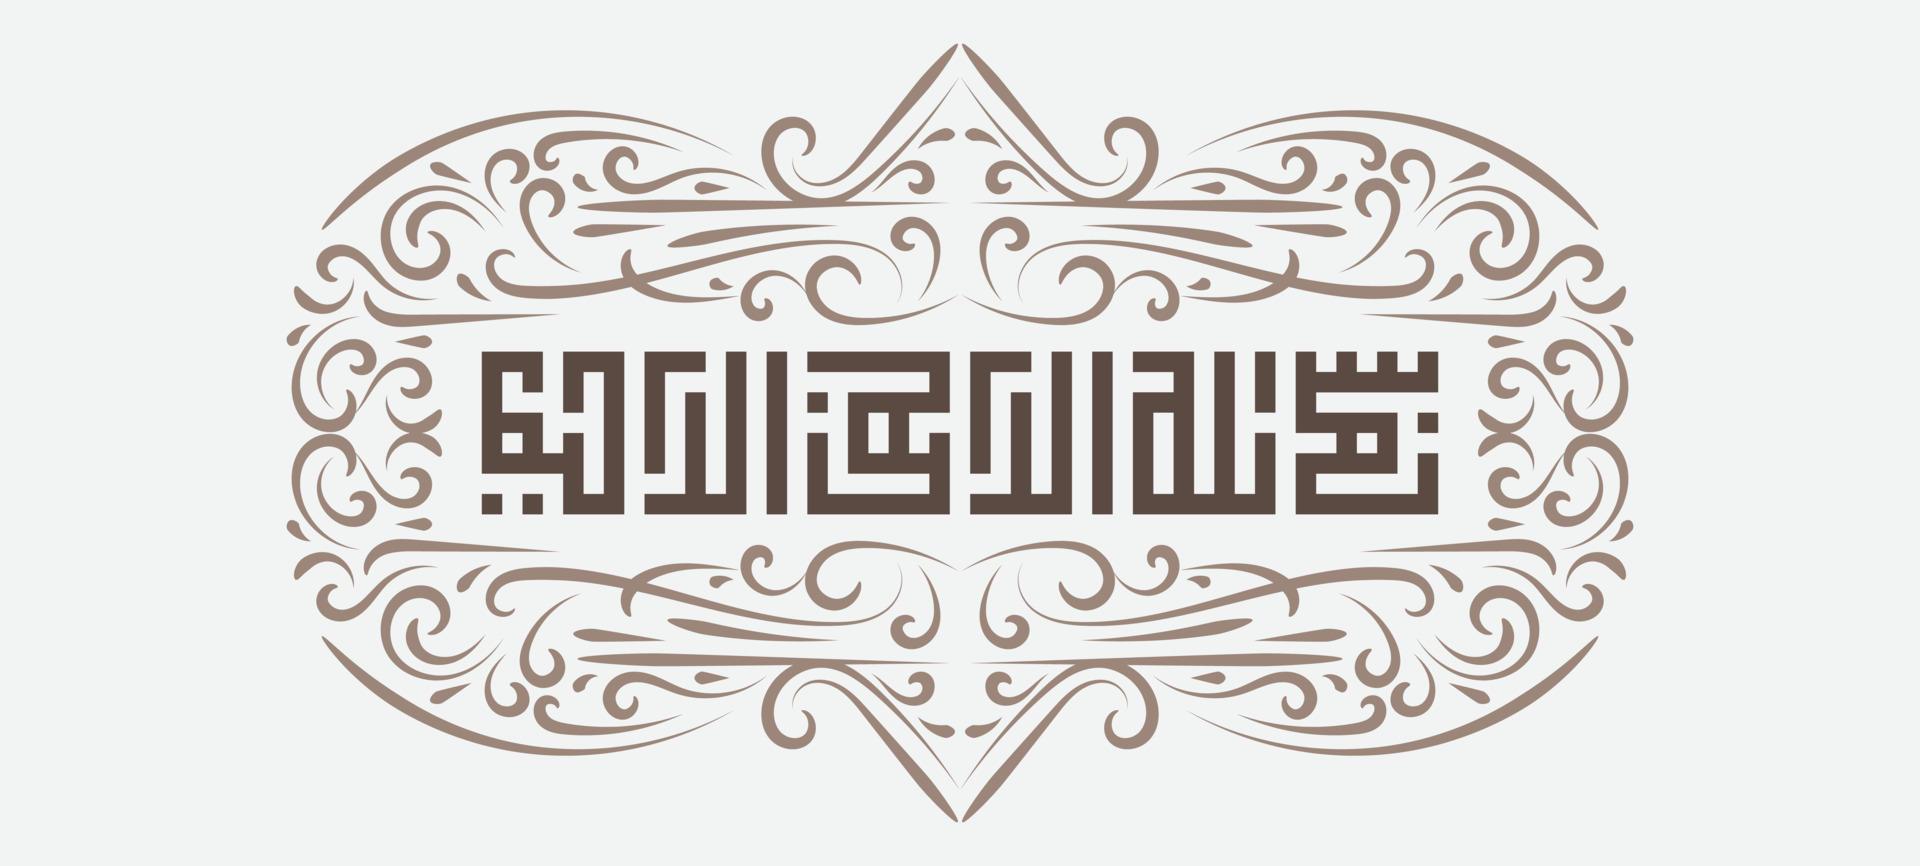 Bismillah Written in Islamic or Arabic Calligraphy with vintage frame. Meaning of Bismillah, In the Name of Allah, The Compassionate, The Merciful vector